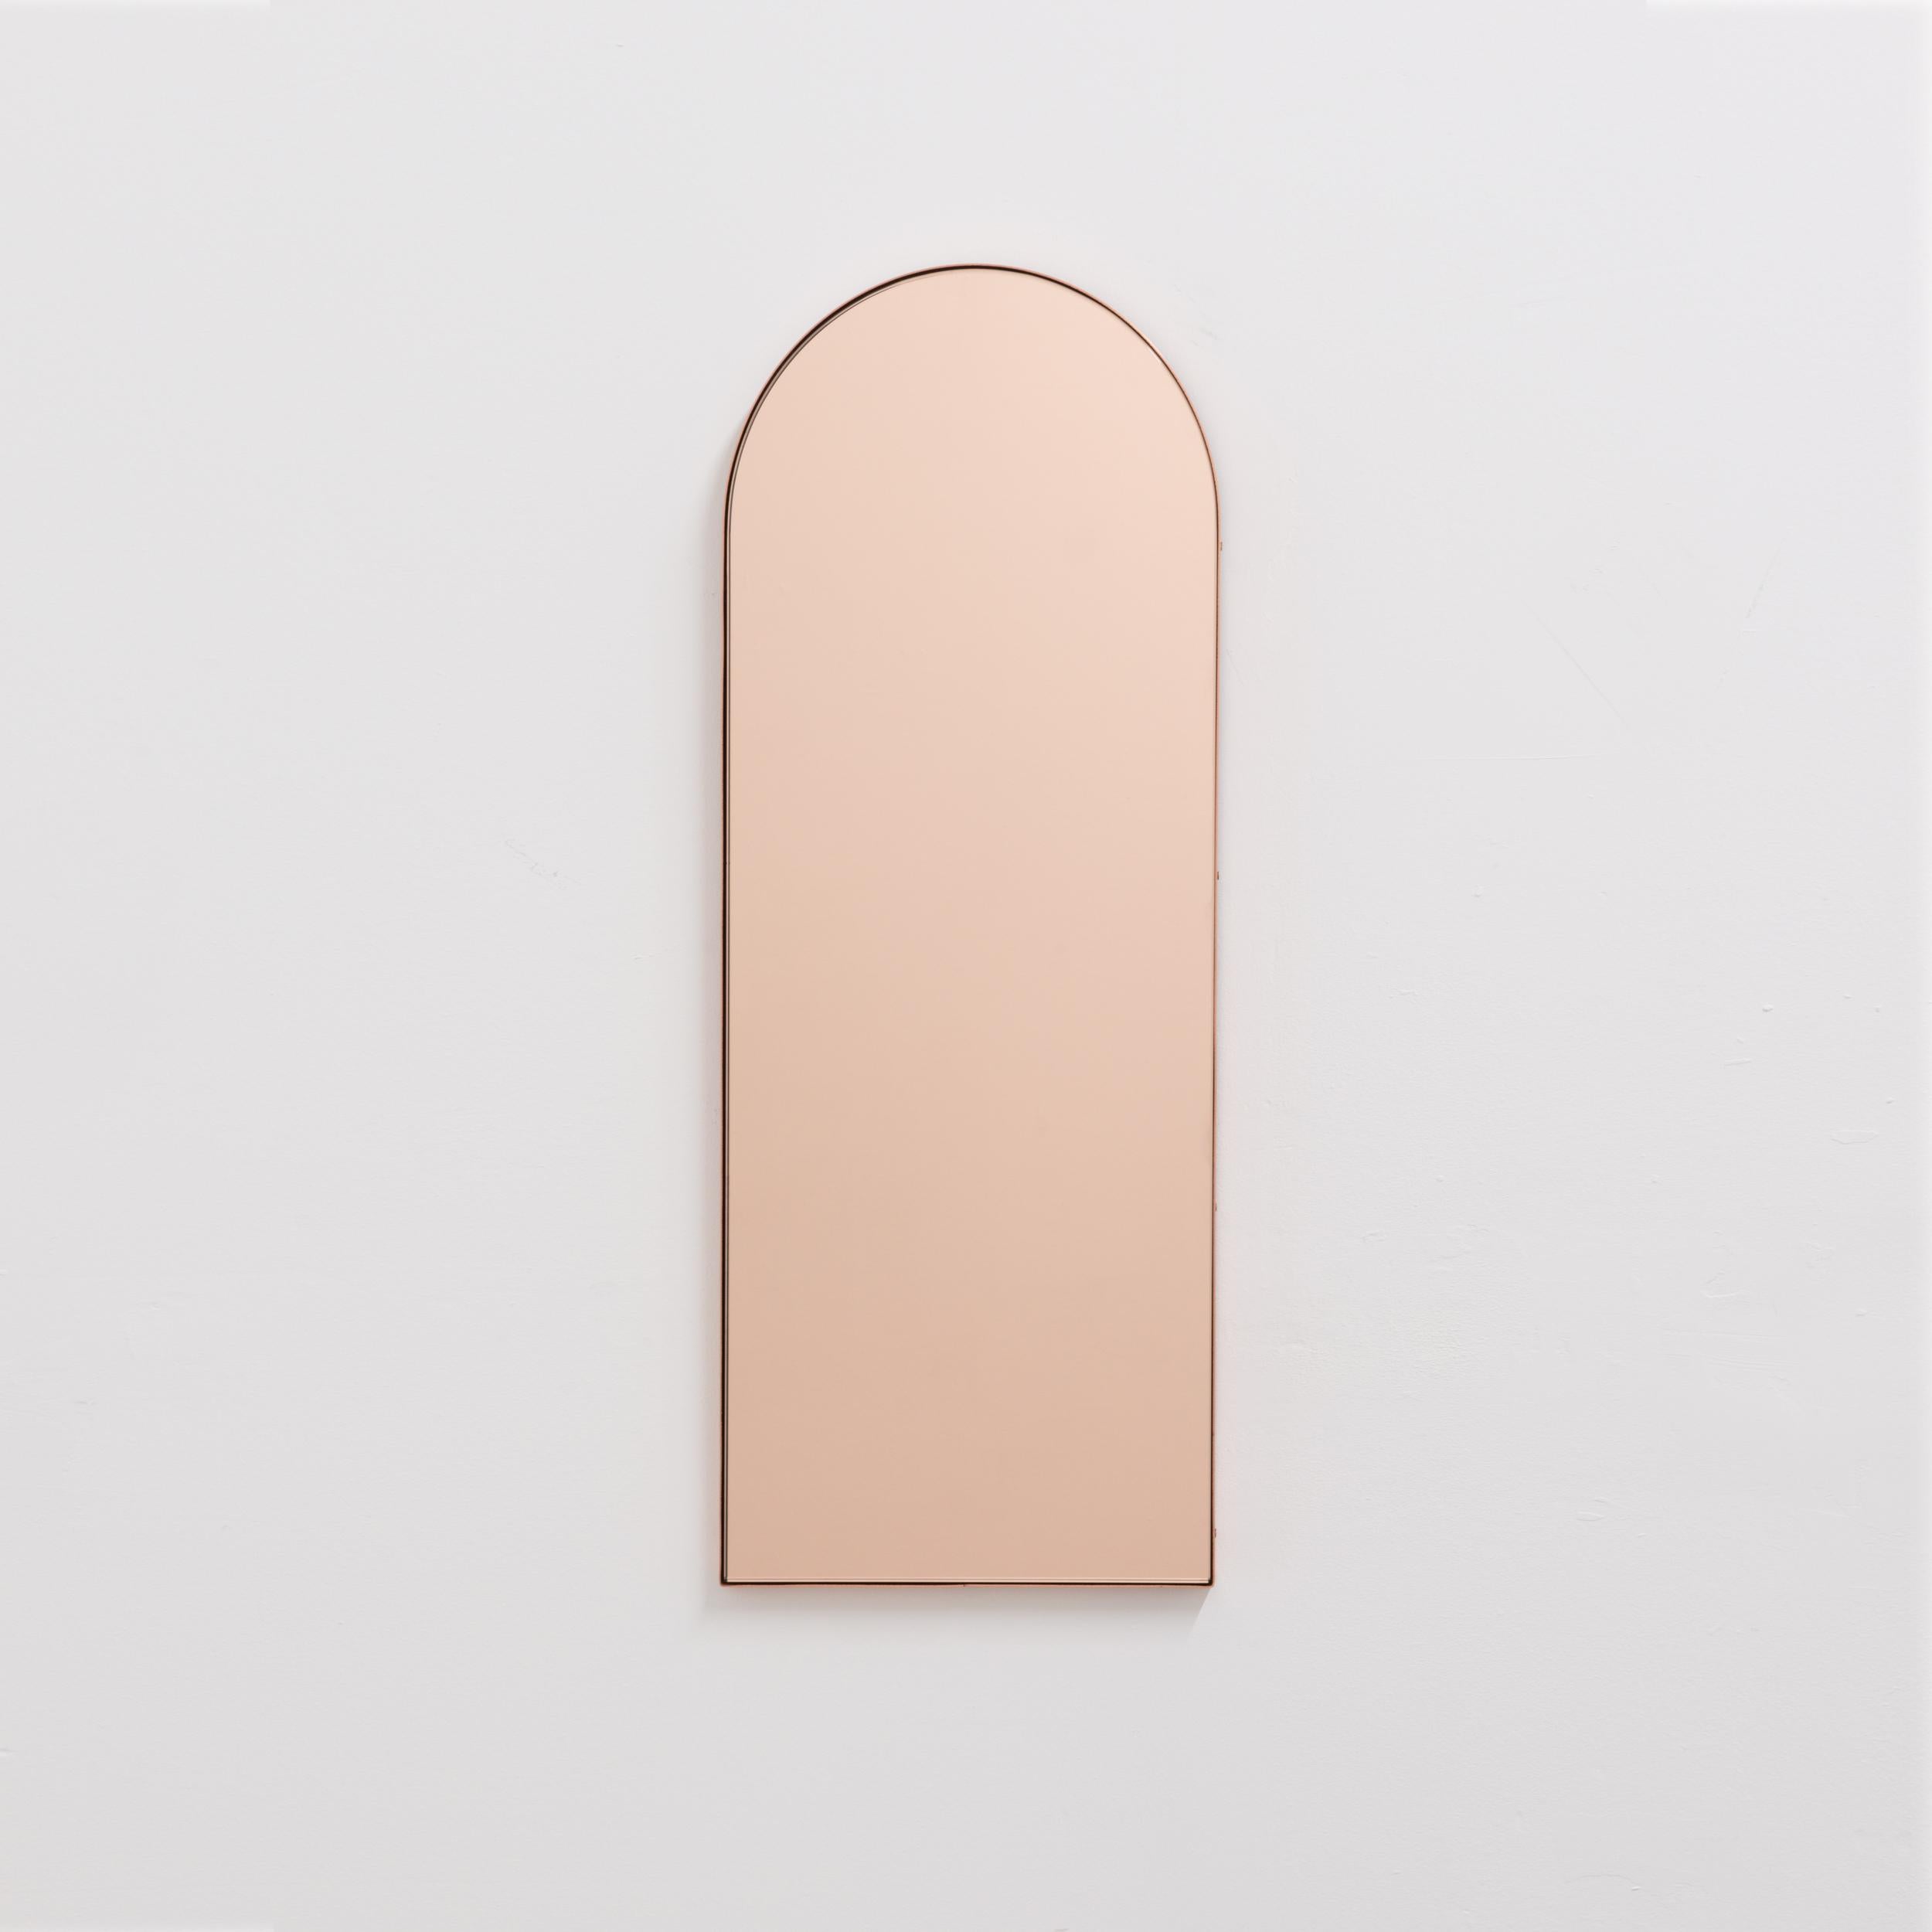 Arcus Arch shaped Rose Gold Contemporary Mirror with a Copper Frame, Medium In New Condition For Sale In London, GB